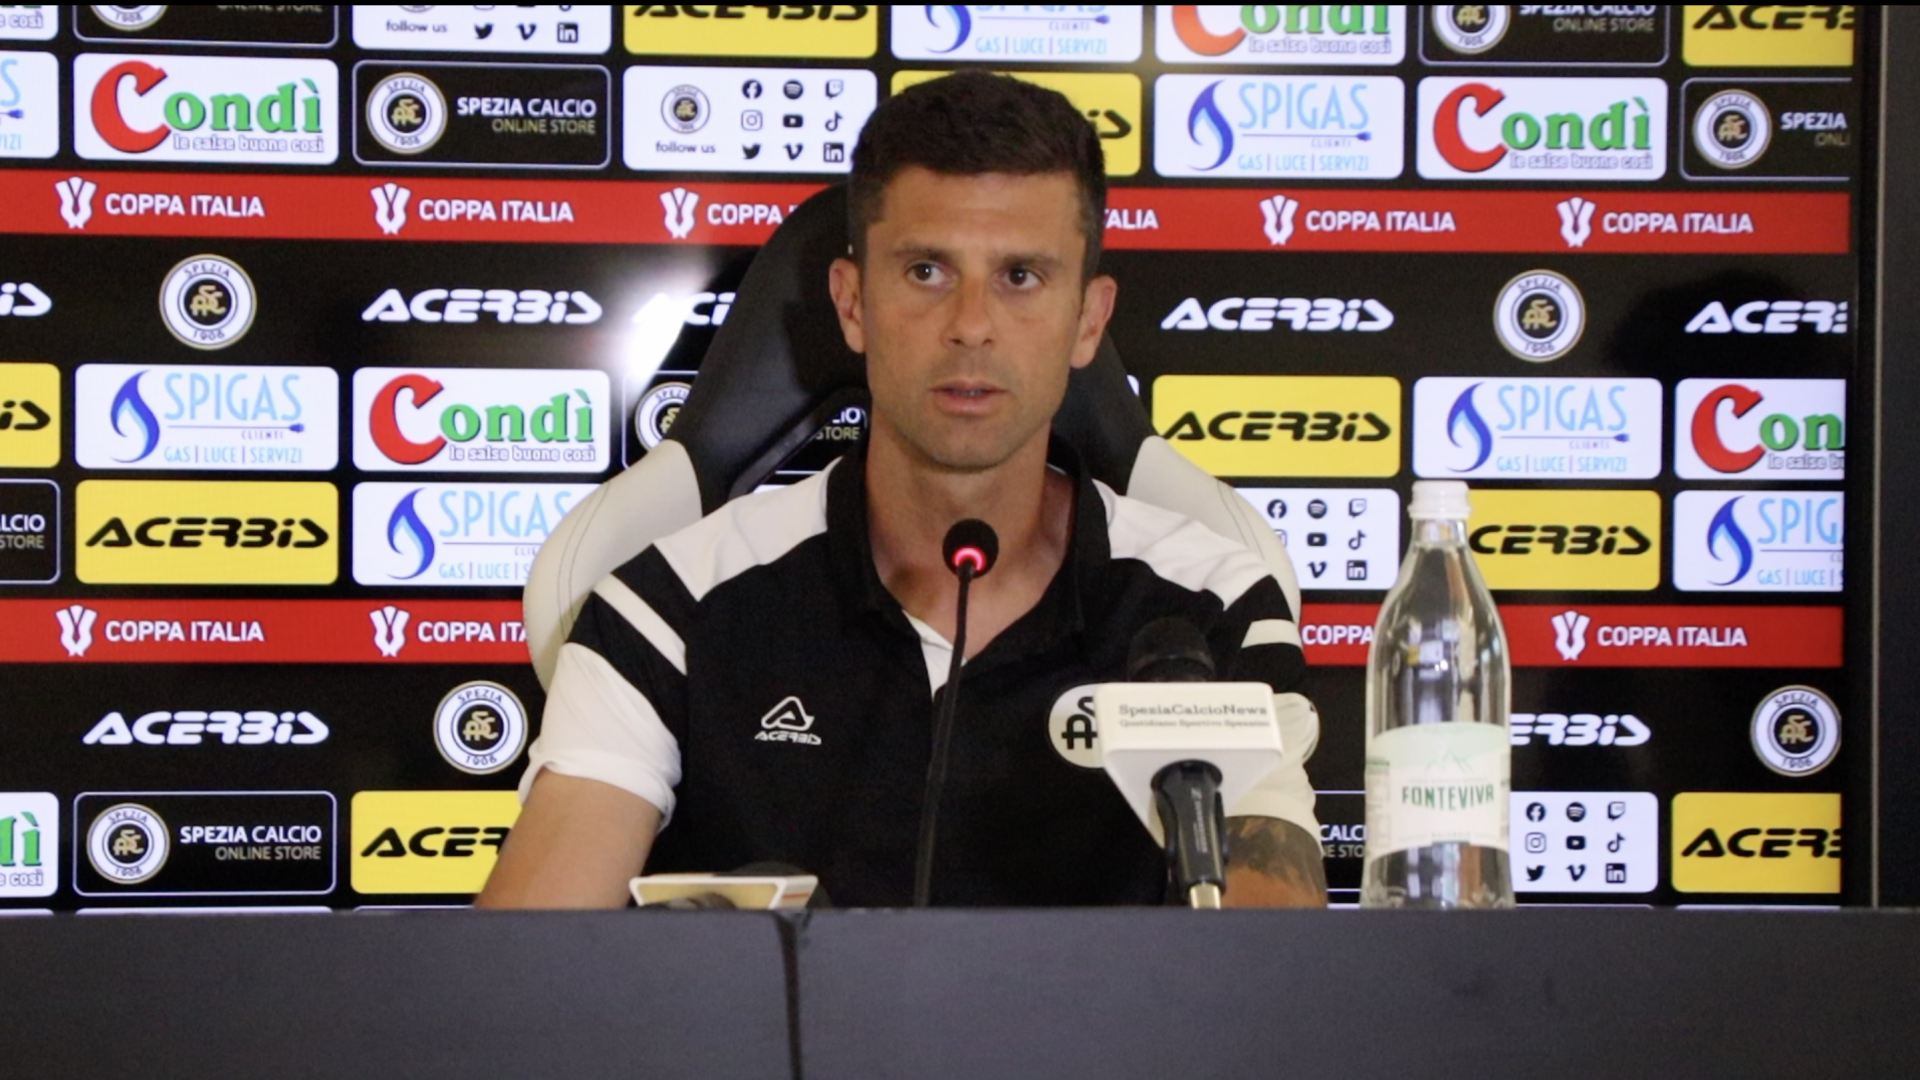 Thiago Motta: “The players are helpful and ready to work hard: it’s time for the first test of the season”